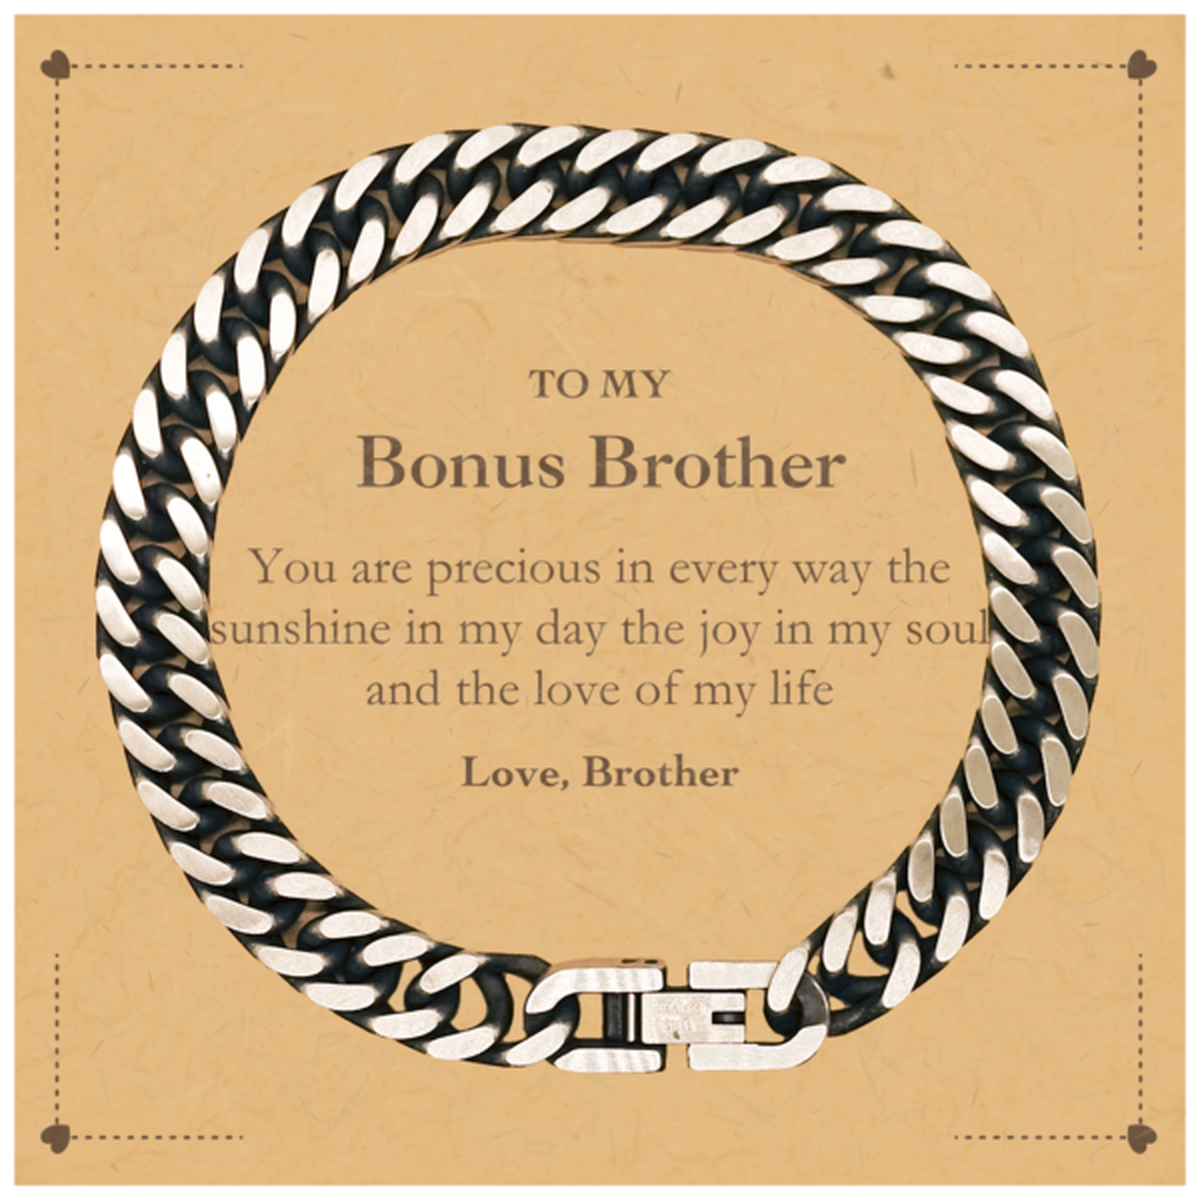 Graduation Gifts for Bonus Brother Cuban Link Chain Bracelet Present from Brother, Christmas Bonus Brother Birthday Gifts Bonus Brother You are precious in every way the sunshine in my day. Love, Brother